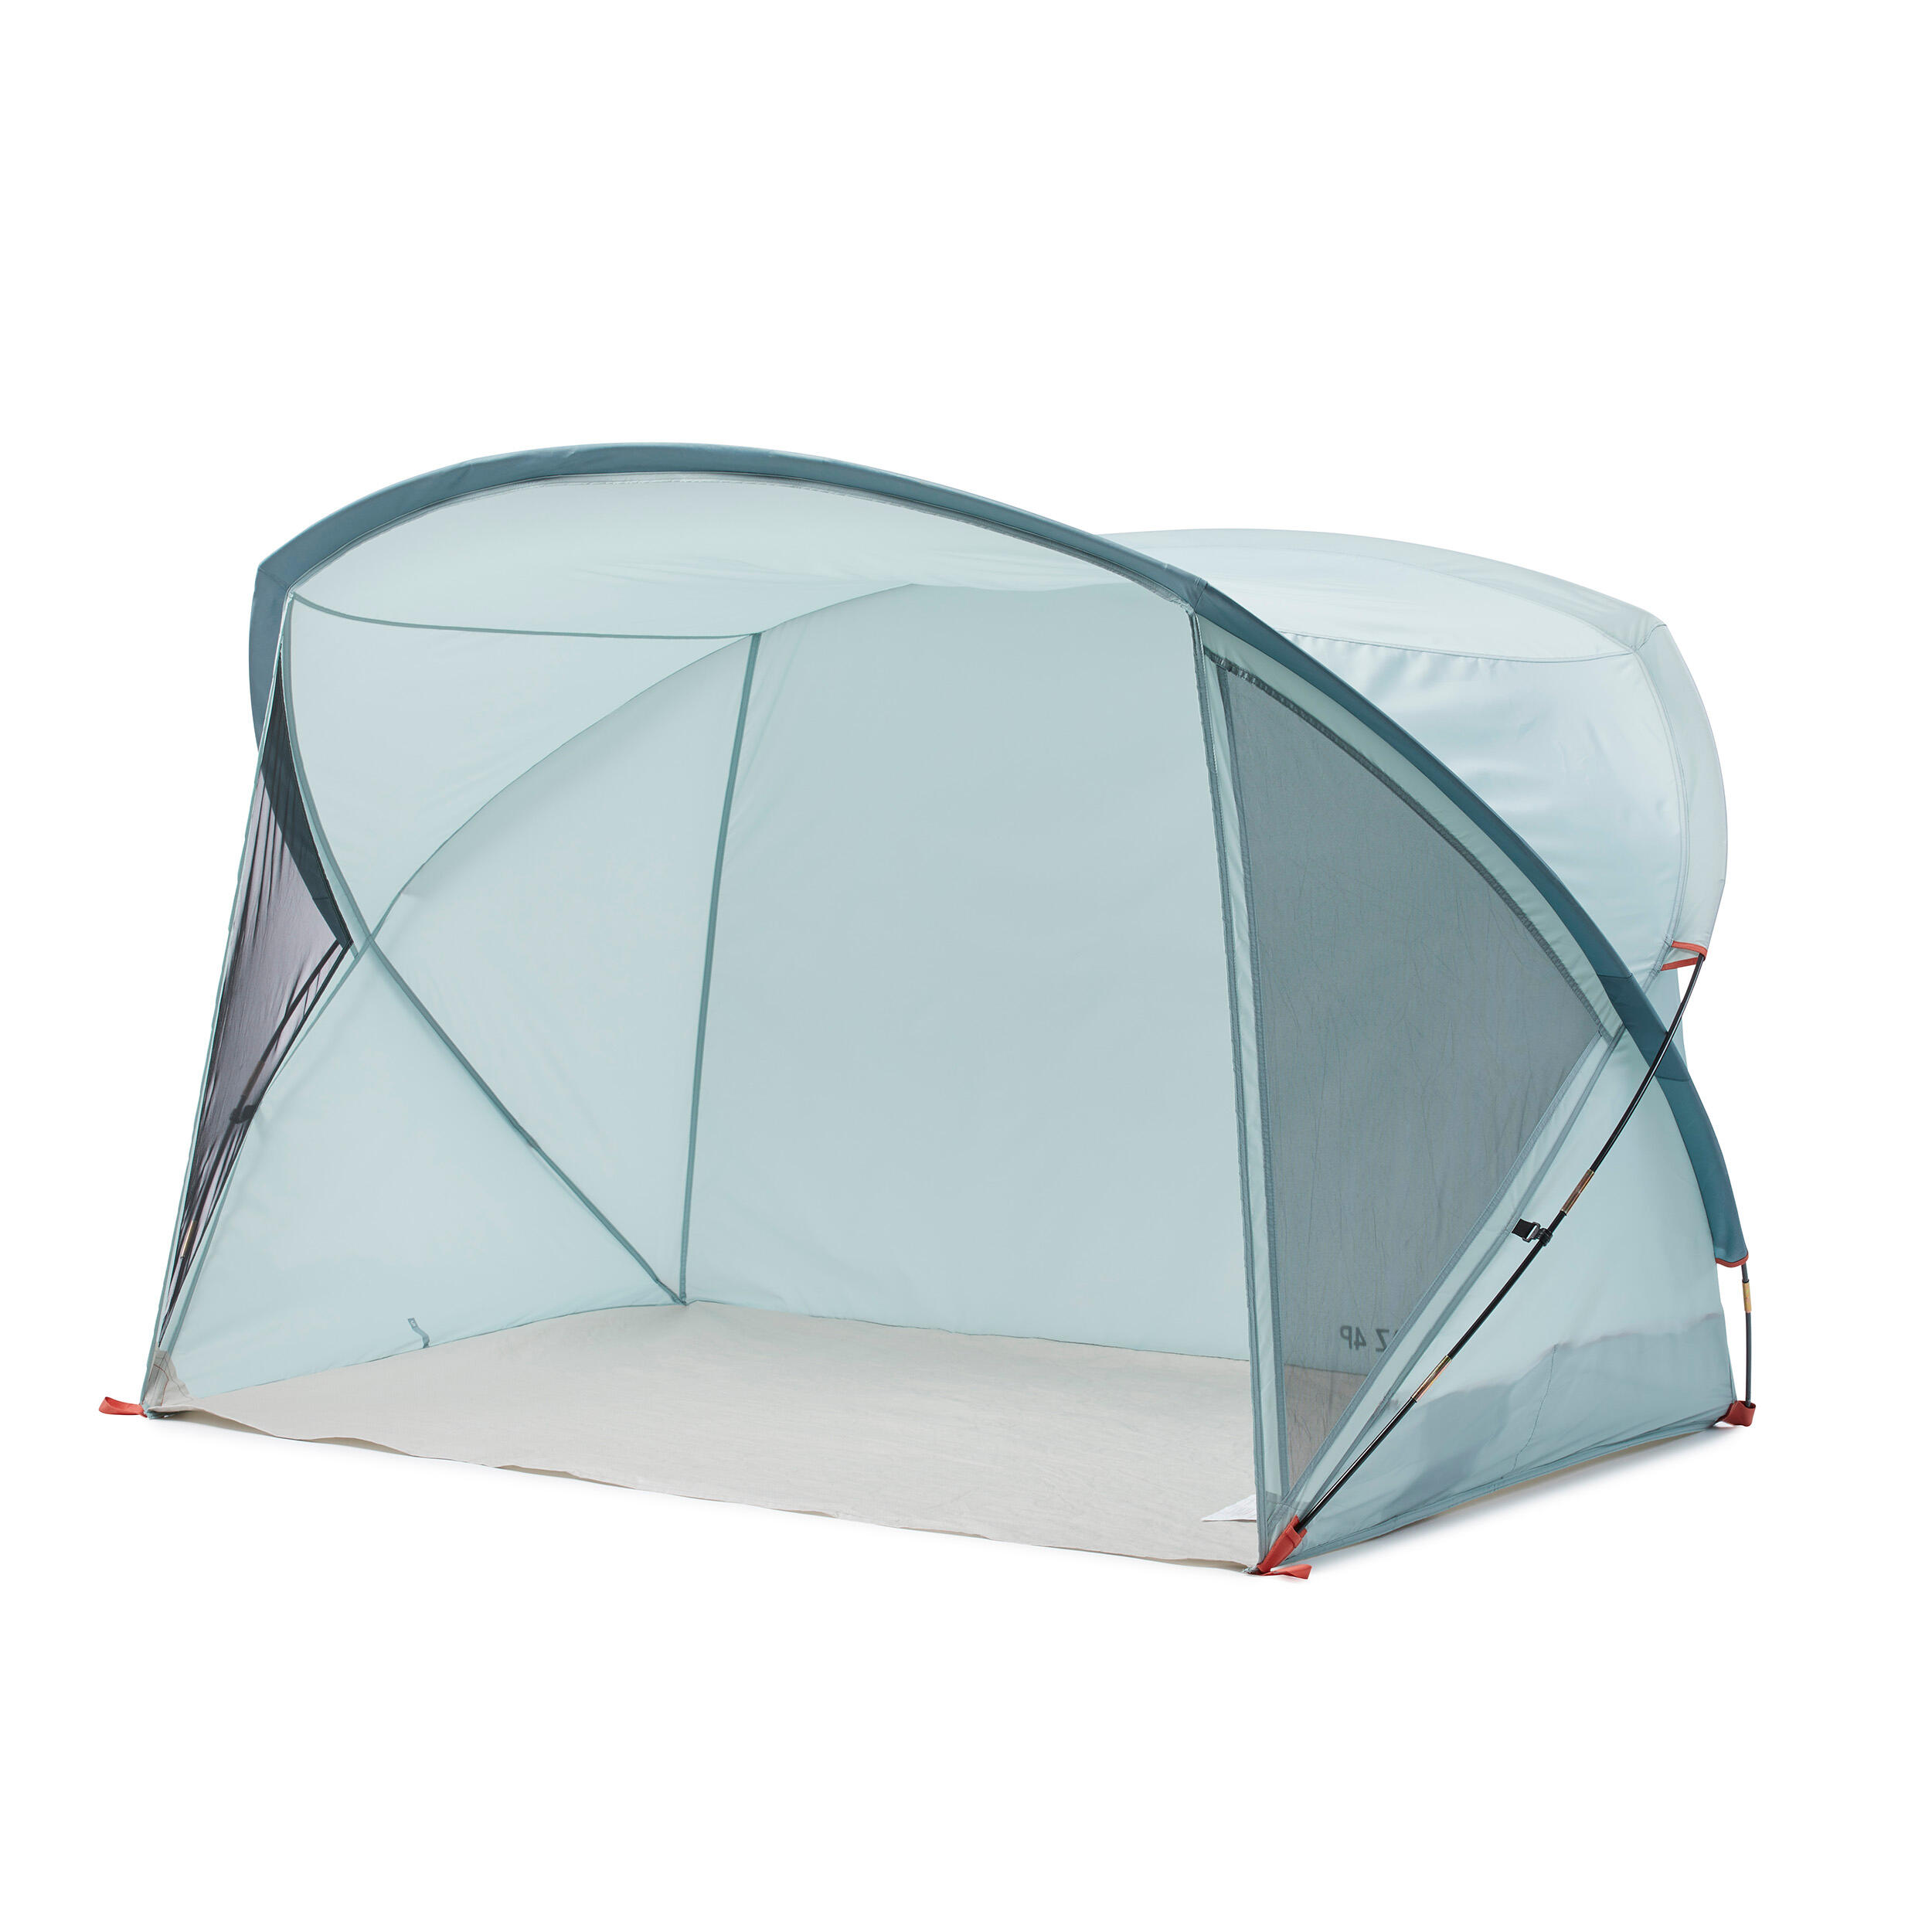 Quechua Camping Shelter With Poles - 4 Person Arpenaz 4p